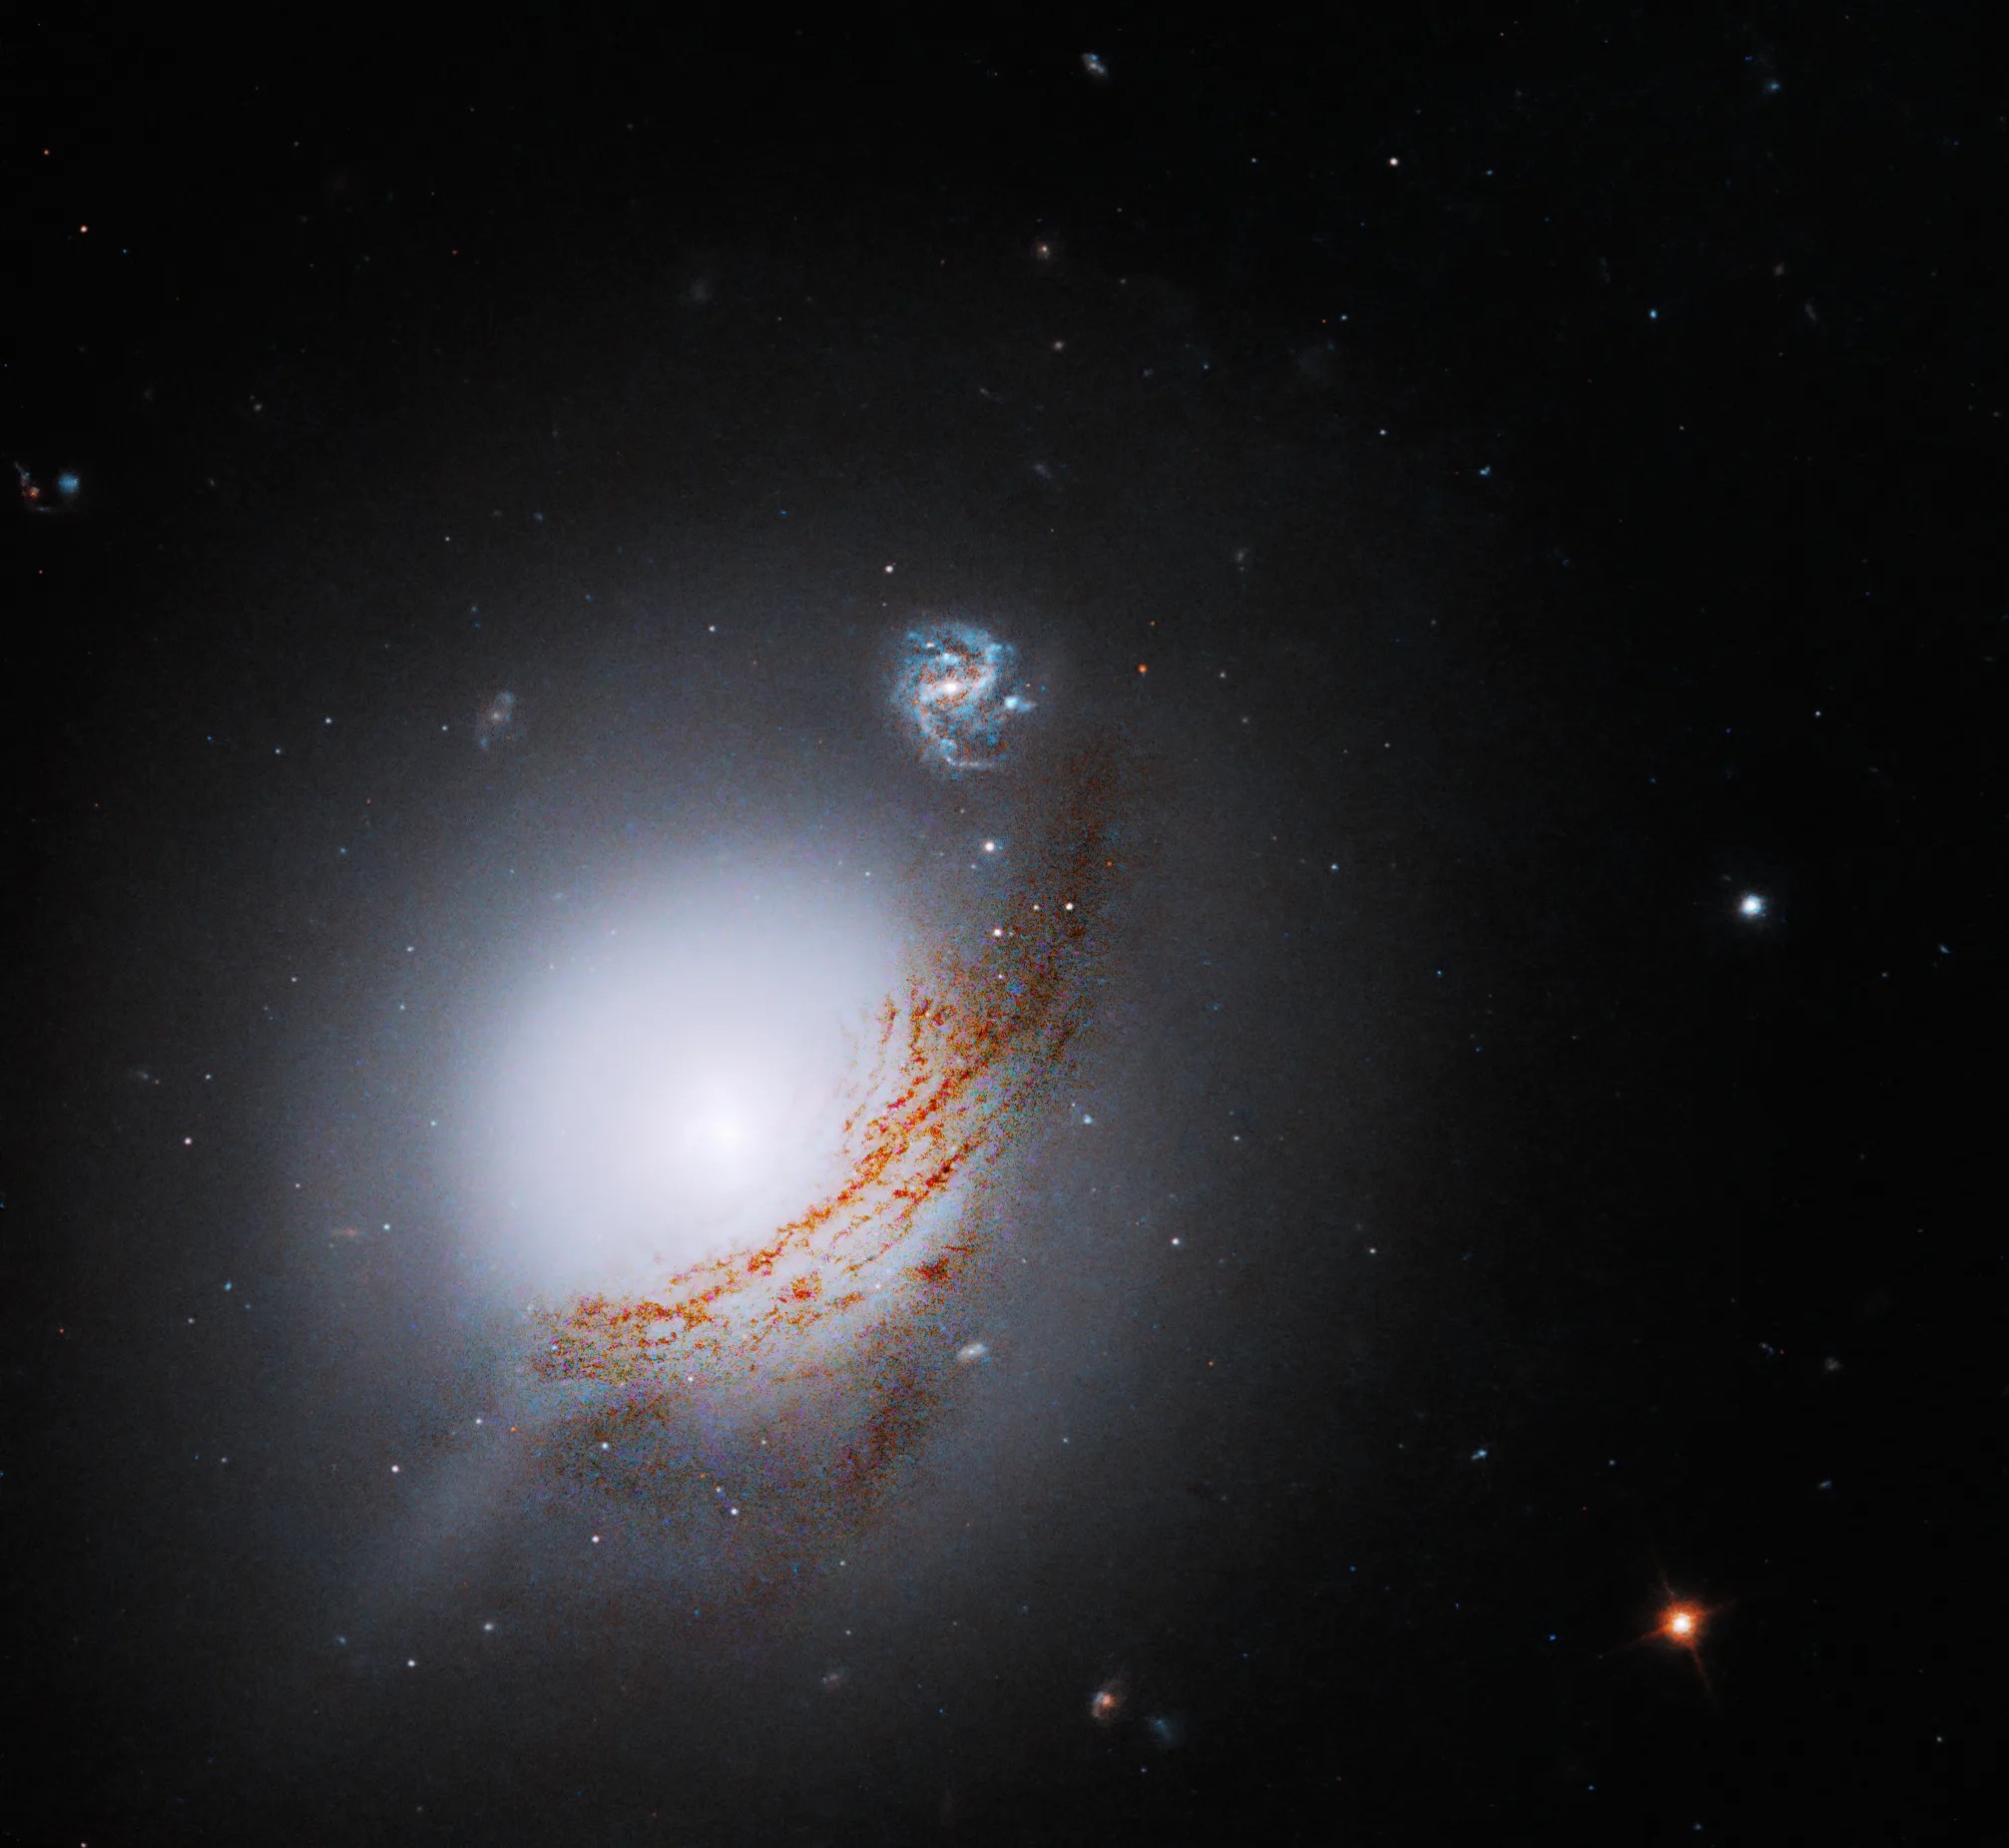 Lower left: Bright-white sphere of stars that is more diffuse toward its edges. Band of brown streaks arcs from the sphere's lower left to upper right where a face-on barred spiral galaxy shines in the distance. Black background dotted with stars.